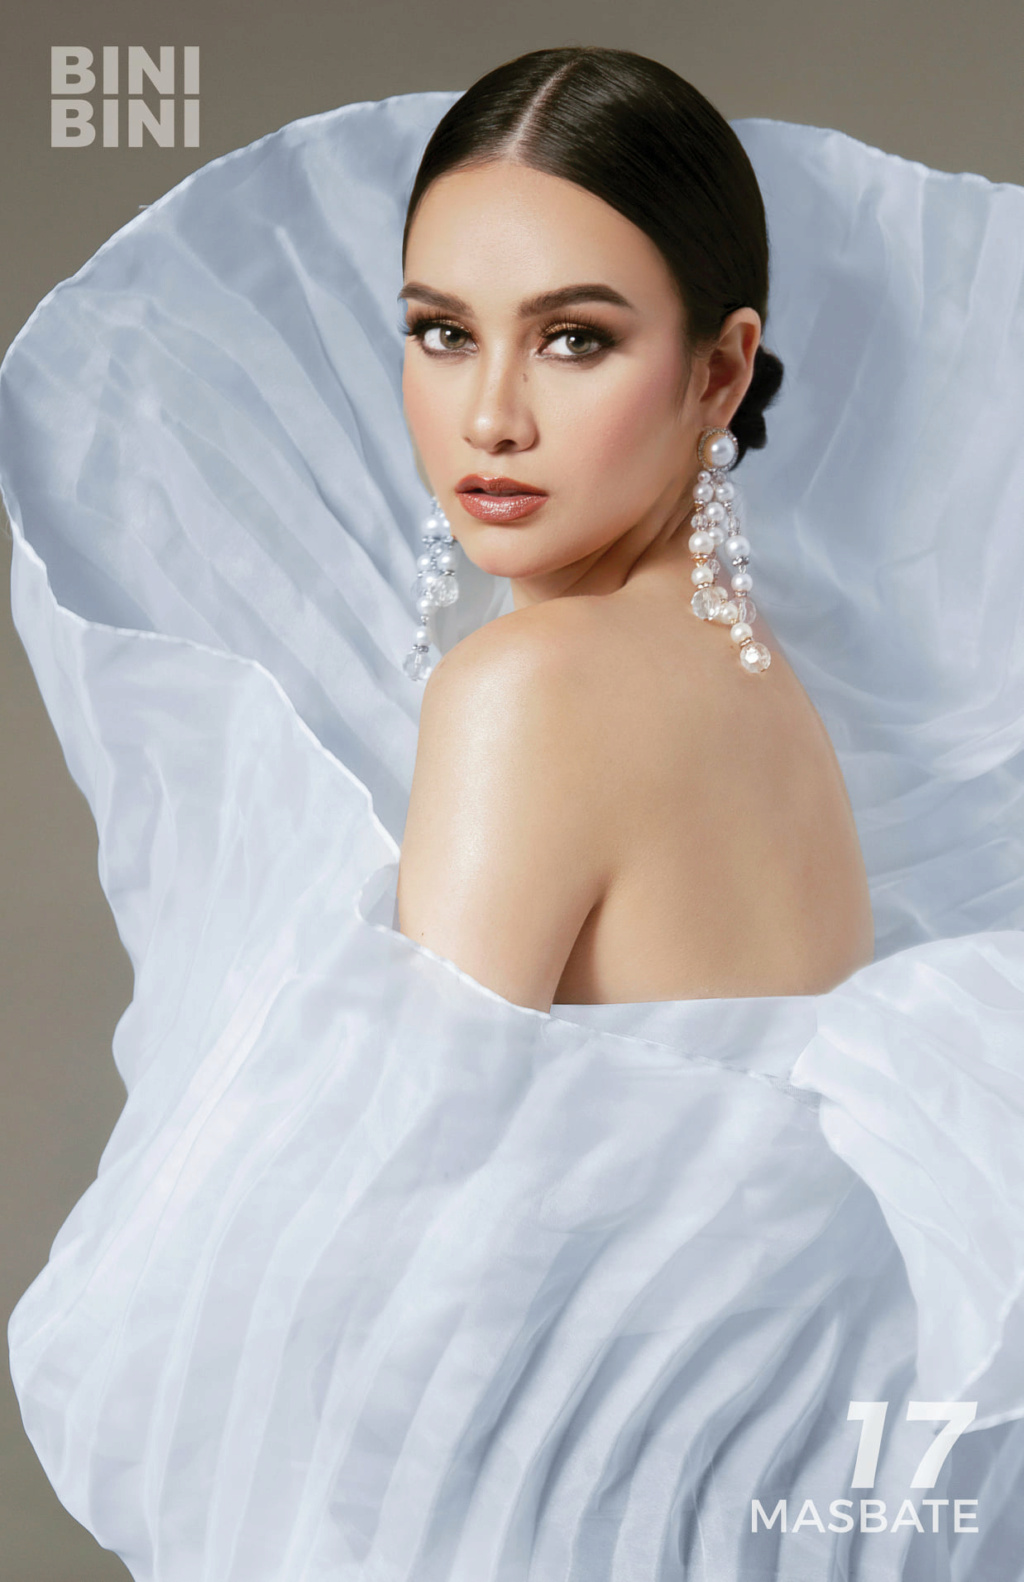 Binibining Pilipinas 2020 - OFFICIAL PORTRAIT - Official Candidates was reduced to 34 from page 4 - Page 4 3194